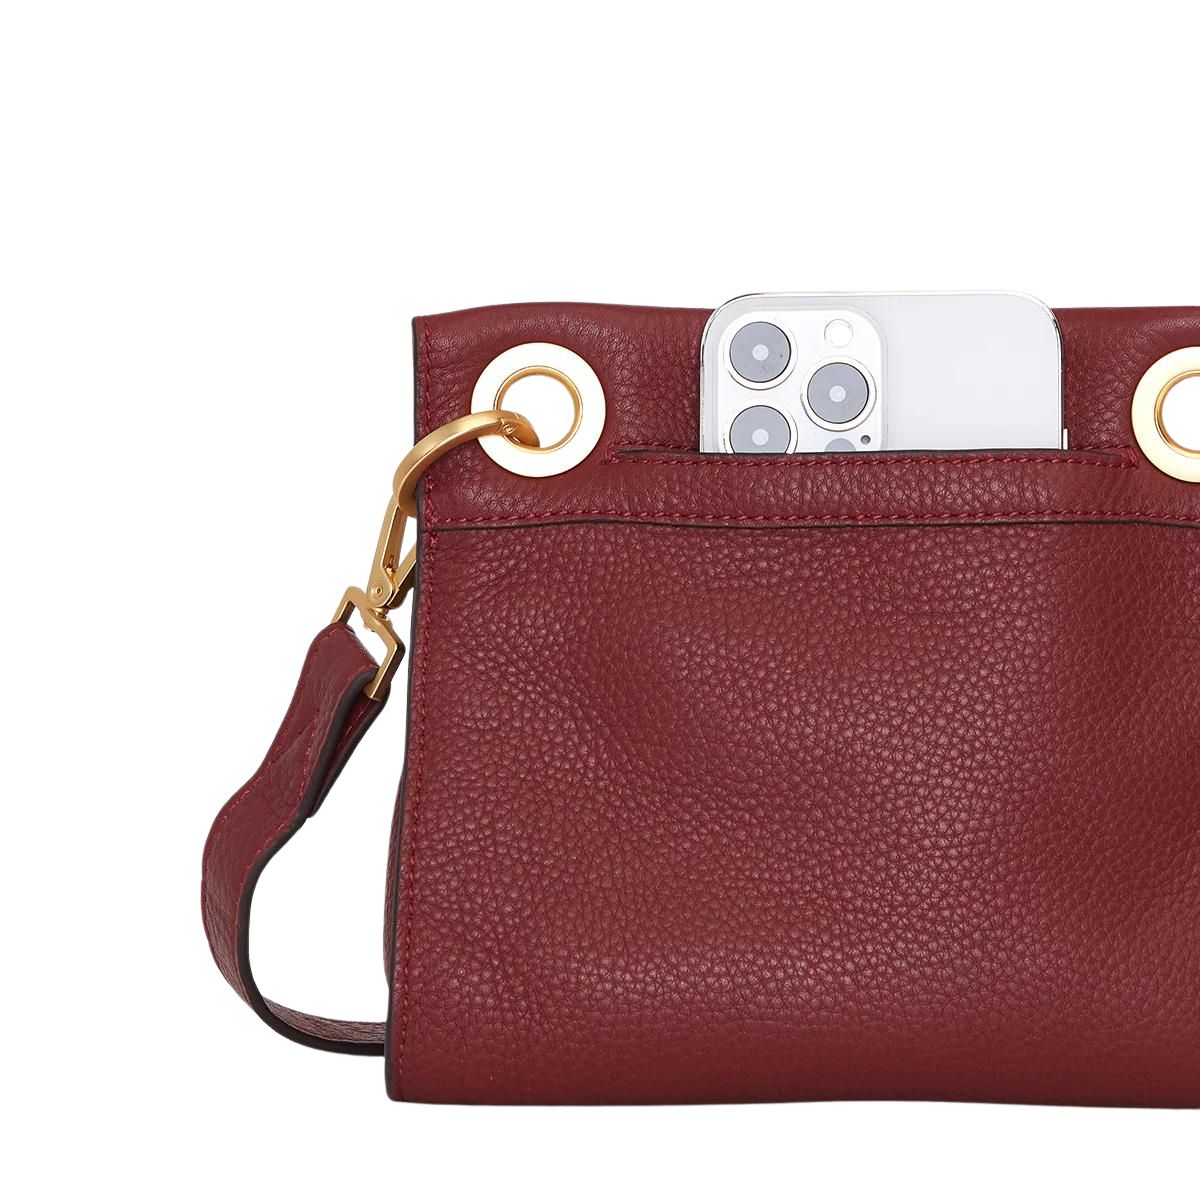 Hammitt Tony Small Crossbody Bag in Pomodoro Red with Hammered Brushed Gold